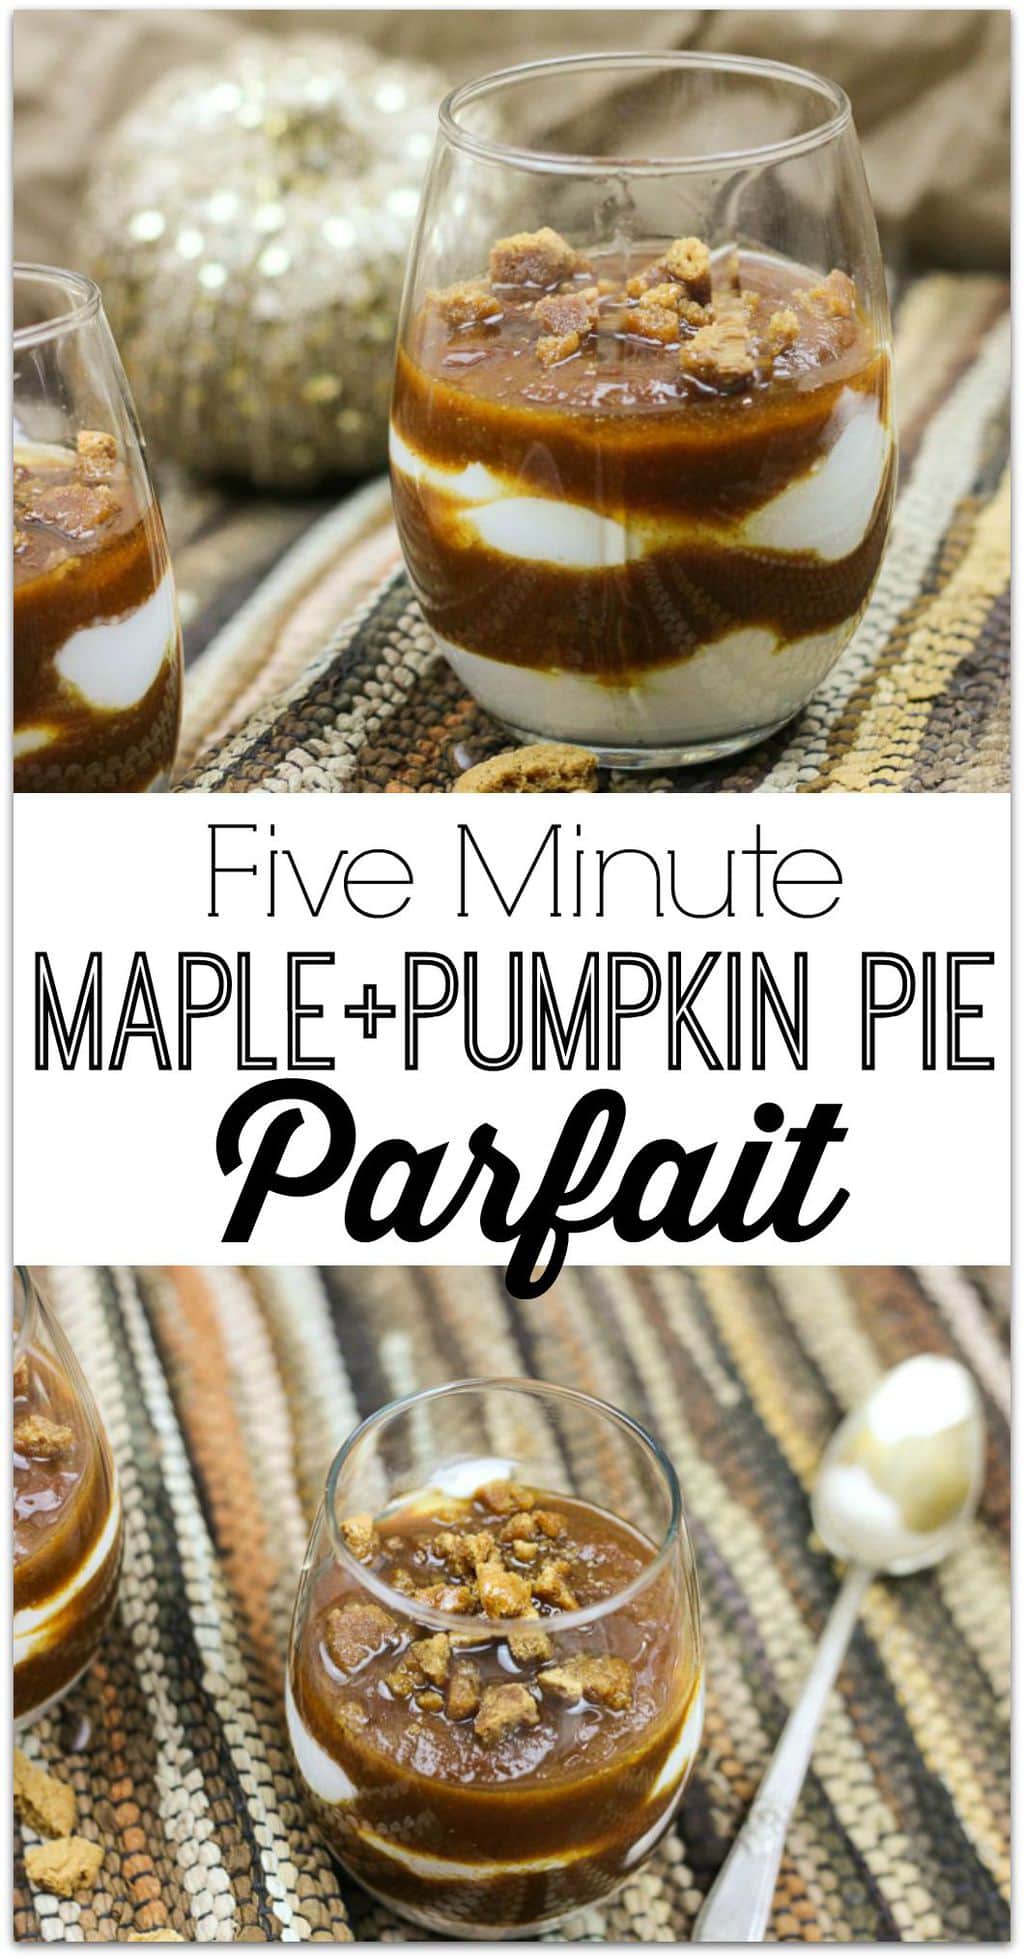 This five minute Maple & Pumpkin Pie Parfait is the perfect easy treat. With Greek yogurt and pumpkin puree, you can feel good about serving this as a breakfast food, or add the cookies for a perfect dessert!